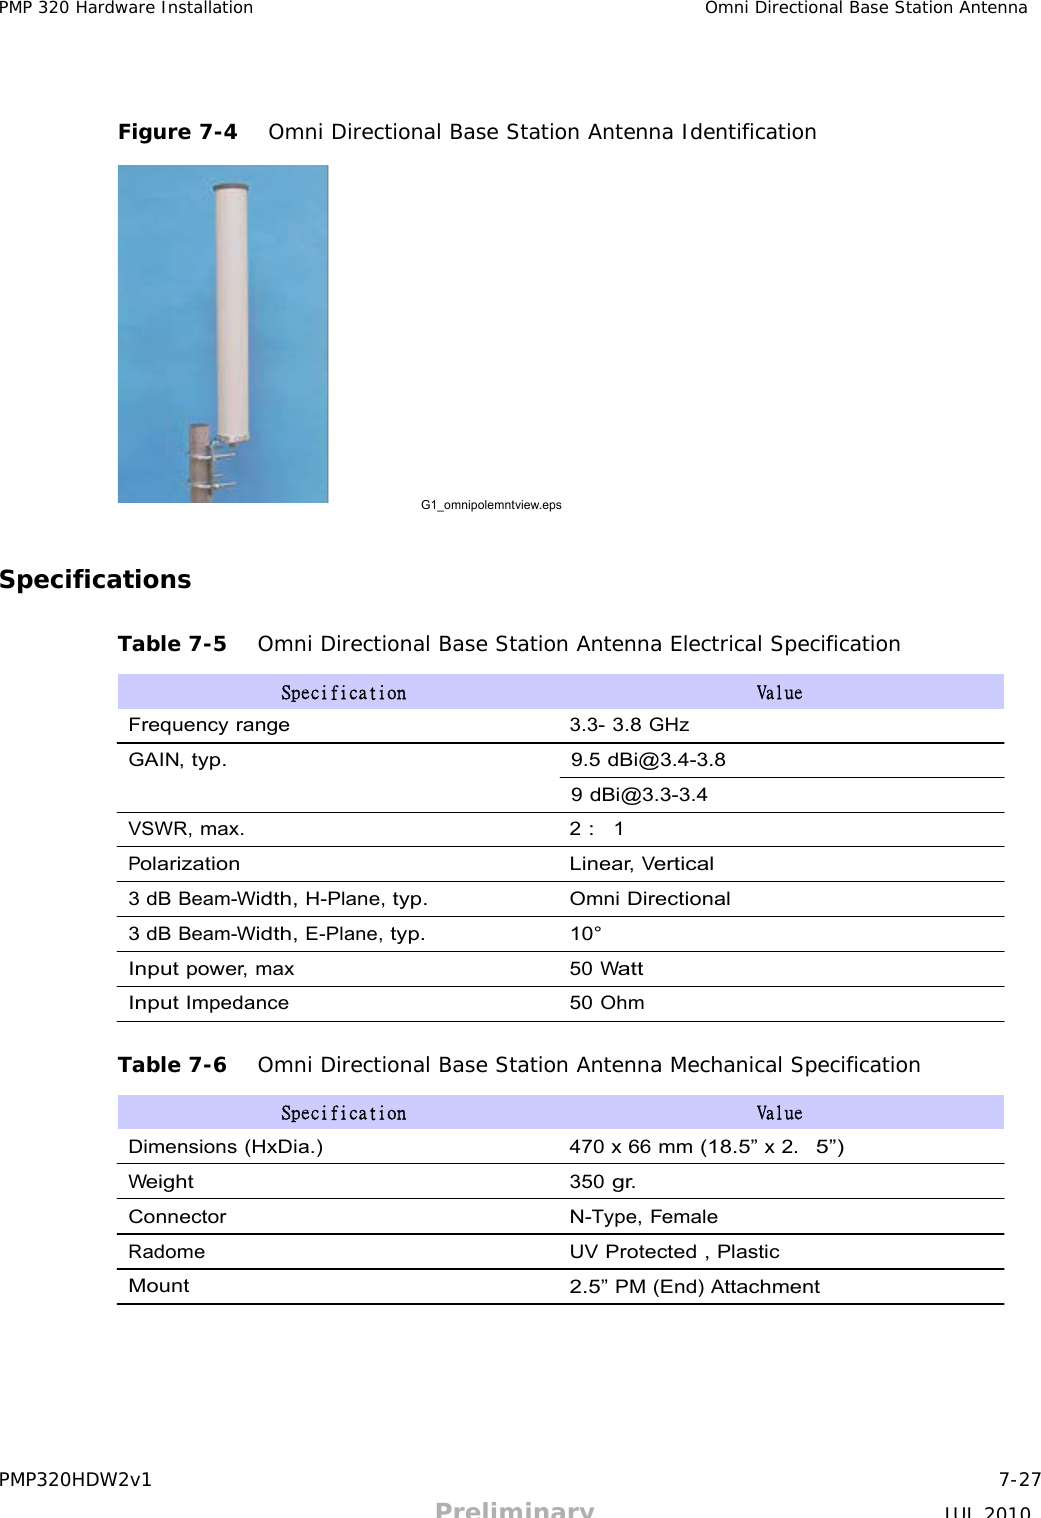 PMP320HDW2v1 7-27 Preliminary JUL 2010 PMP 320 Hardware Installation Omni Directional Base Station Antenna          Figure 7-4   Omni Directional Base Station Antenna Identification                  G1_omnipolemntview.eps    Specifications   Table 7-5   Omni Directional Base Station Antenna Electrical Specification  Specification  Value  Frequency range 3.3- 3.8 GHz  GAIN, typ.  9.5 dBi@3.4-3.8  9 dBi@3.3-3.4  VSWR, max. 2 :  1  Polarization Linear, Vertical  3 dB Beam-Width, H-Plane, typ. Omni Directional  3 dB Beam-Width, E-Plane, typ. 10°  Input power, max 50 Watt  Input Impedance 50 Ohm   Table 7-6   Omni Directional Base Station Antenna Mechanical Specification  Specification  Value  Dimensions (HxDia.) 470 x 66 mm (18.5” x 2.  5”) Weight 350 gr. Connector N-Type, Female  Radome UV Protected , Plastic  Mount 2.5” PM (End) Attachment 